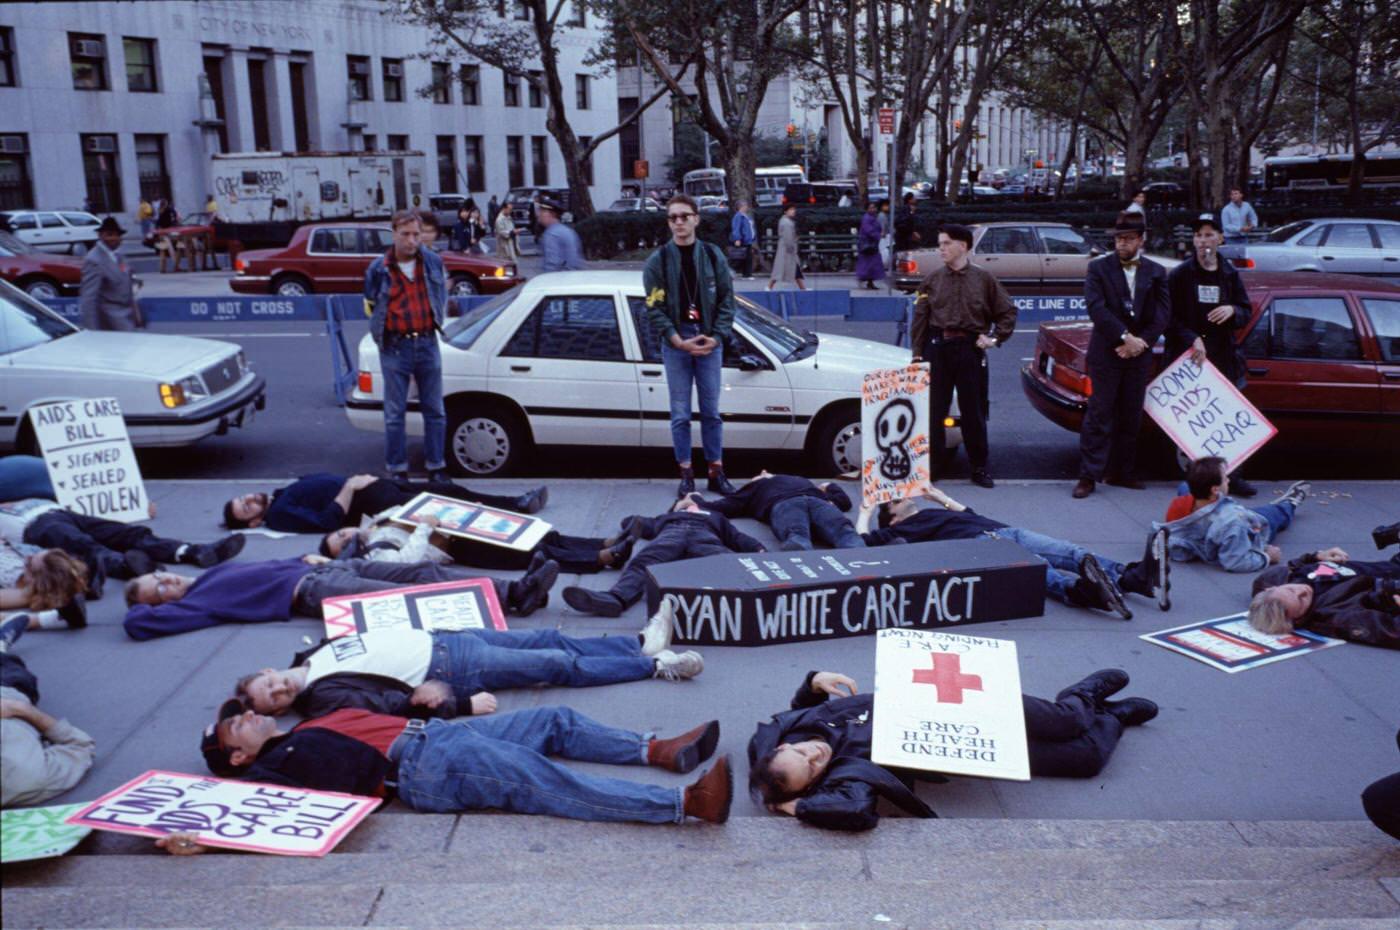 Act Up Demonstration In Foley Square, Manhattan, 1990.